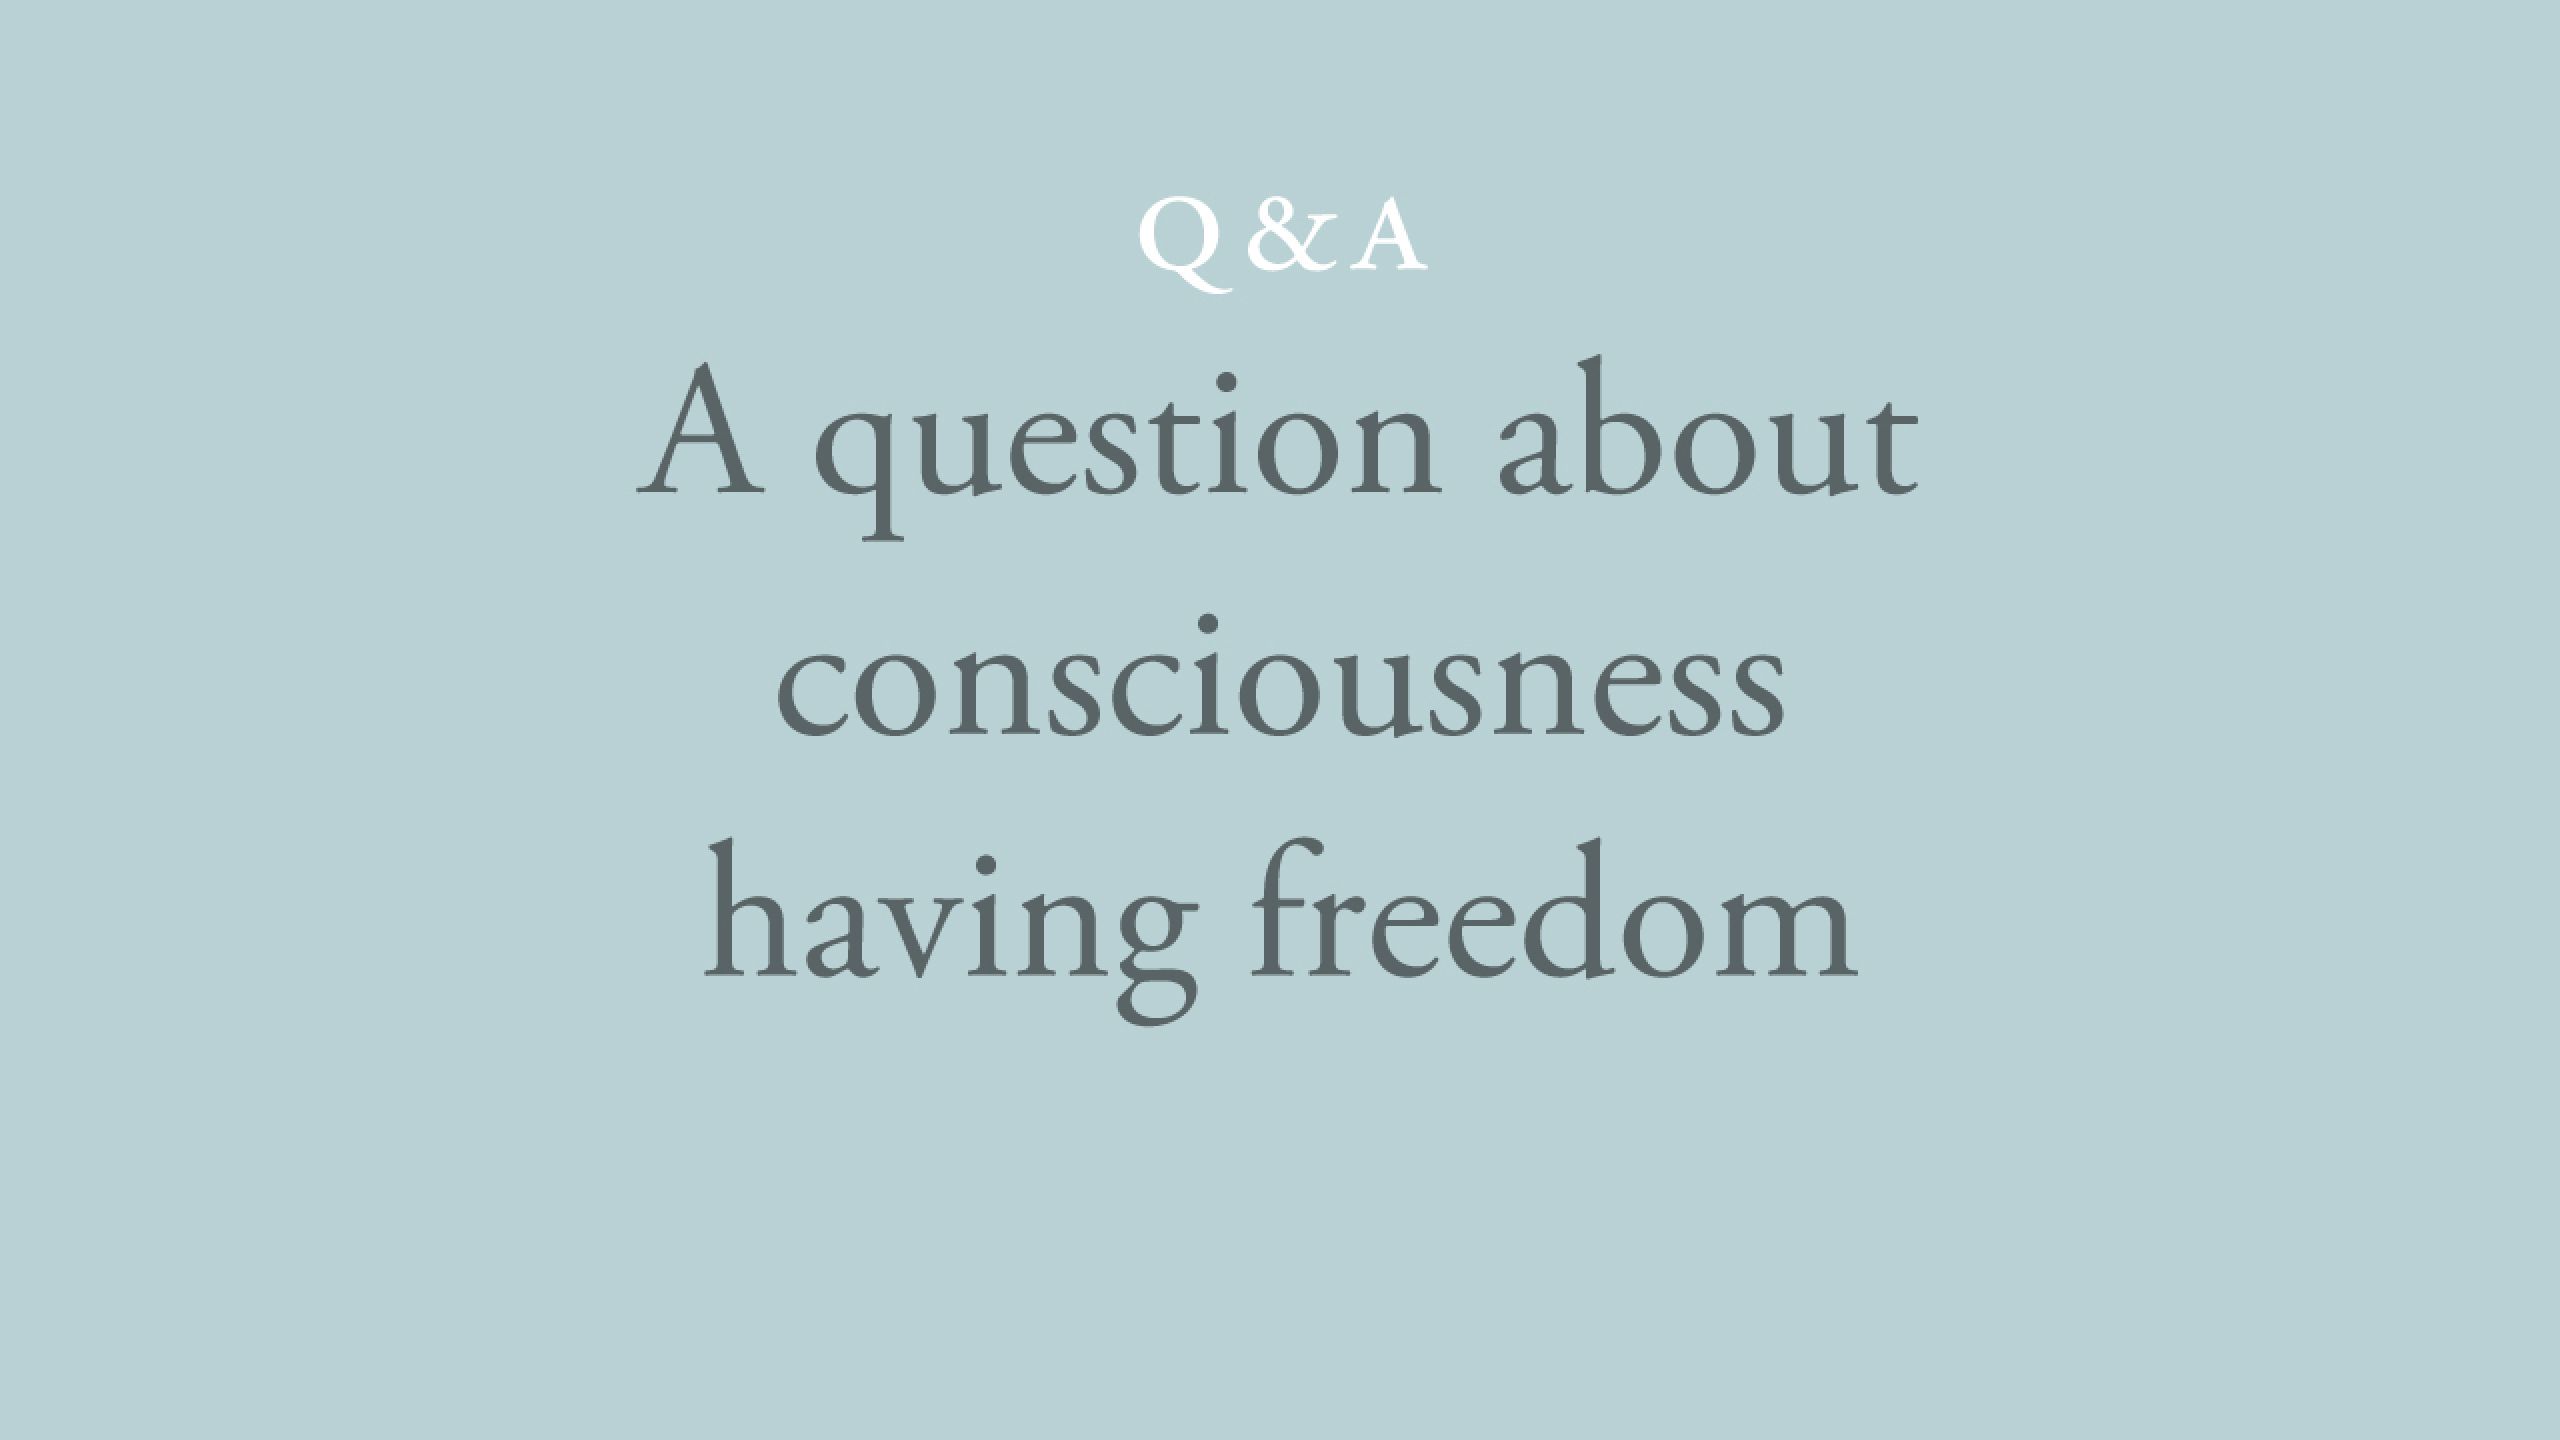 When there is a need for food, how can we say that consciousness has freedom?